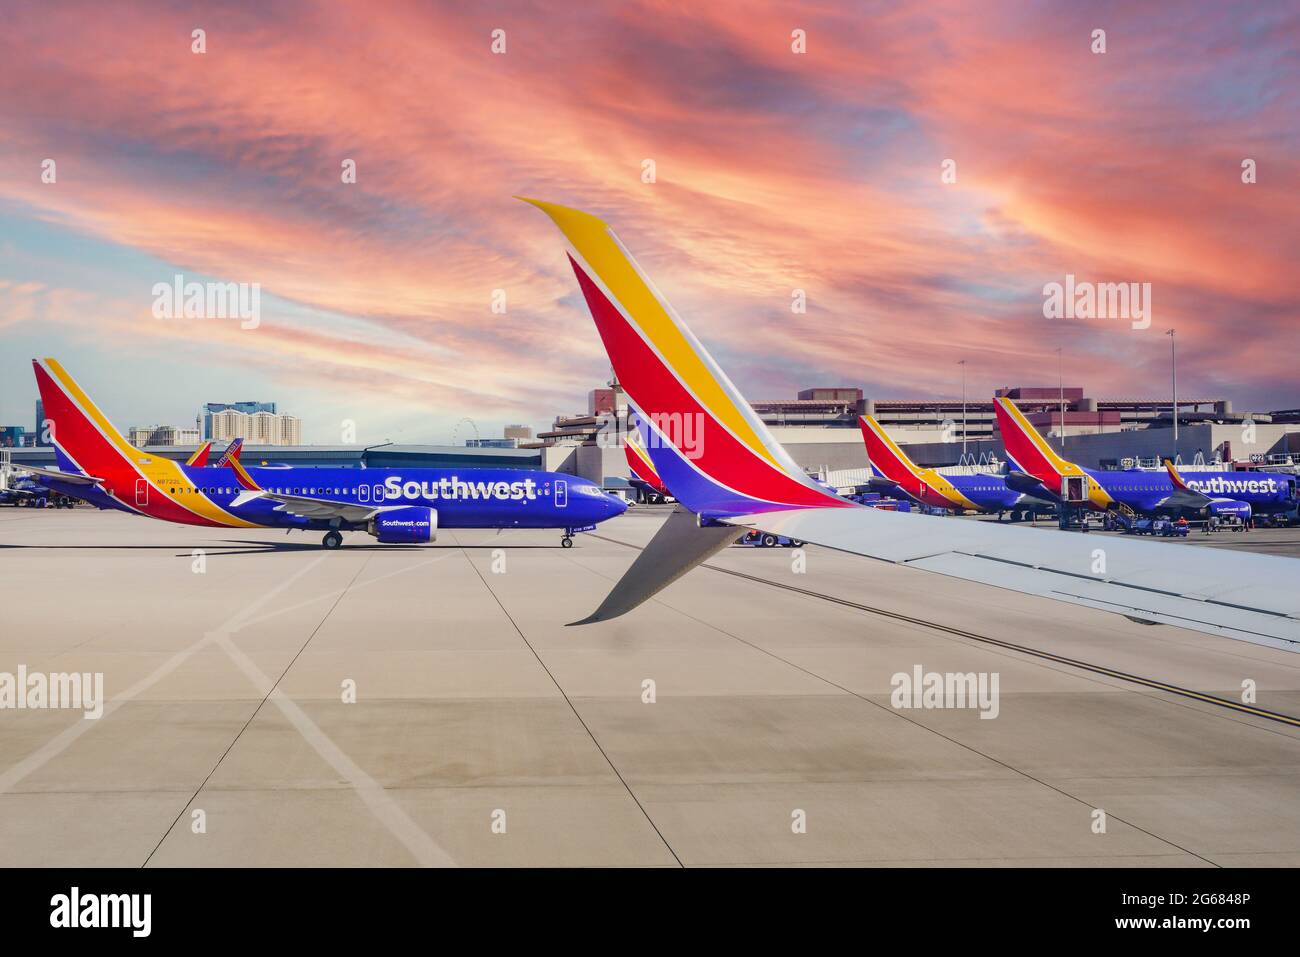 A formation of Southwest Airlines planes at terminal gates at Las Vegas McCarran International Airport in Las Vegas, NV, with casinos in the distance Stock Photo